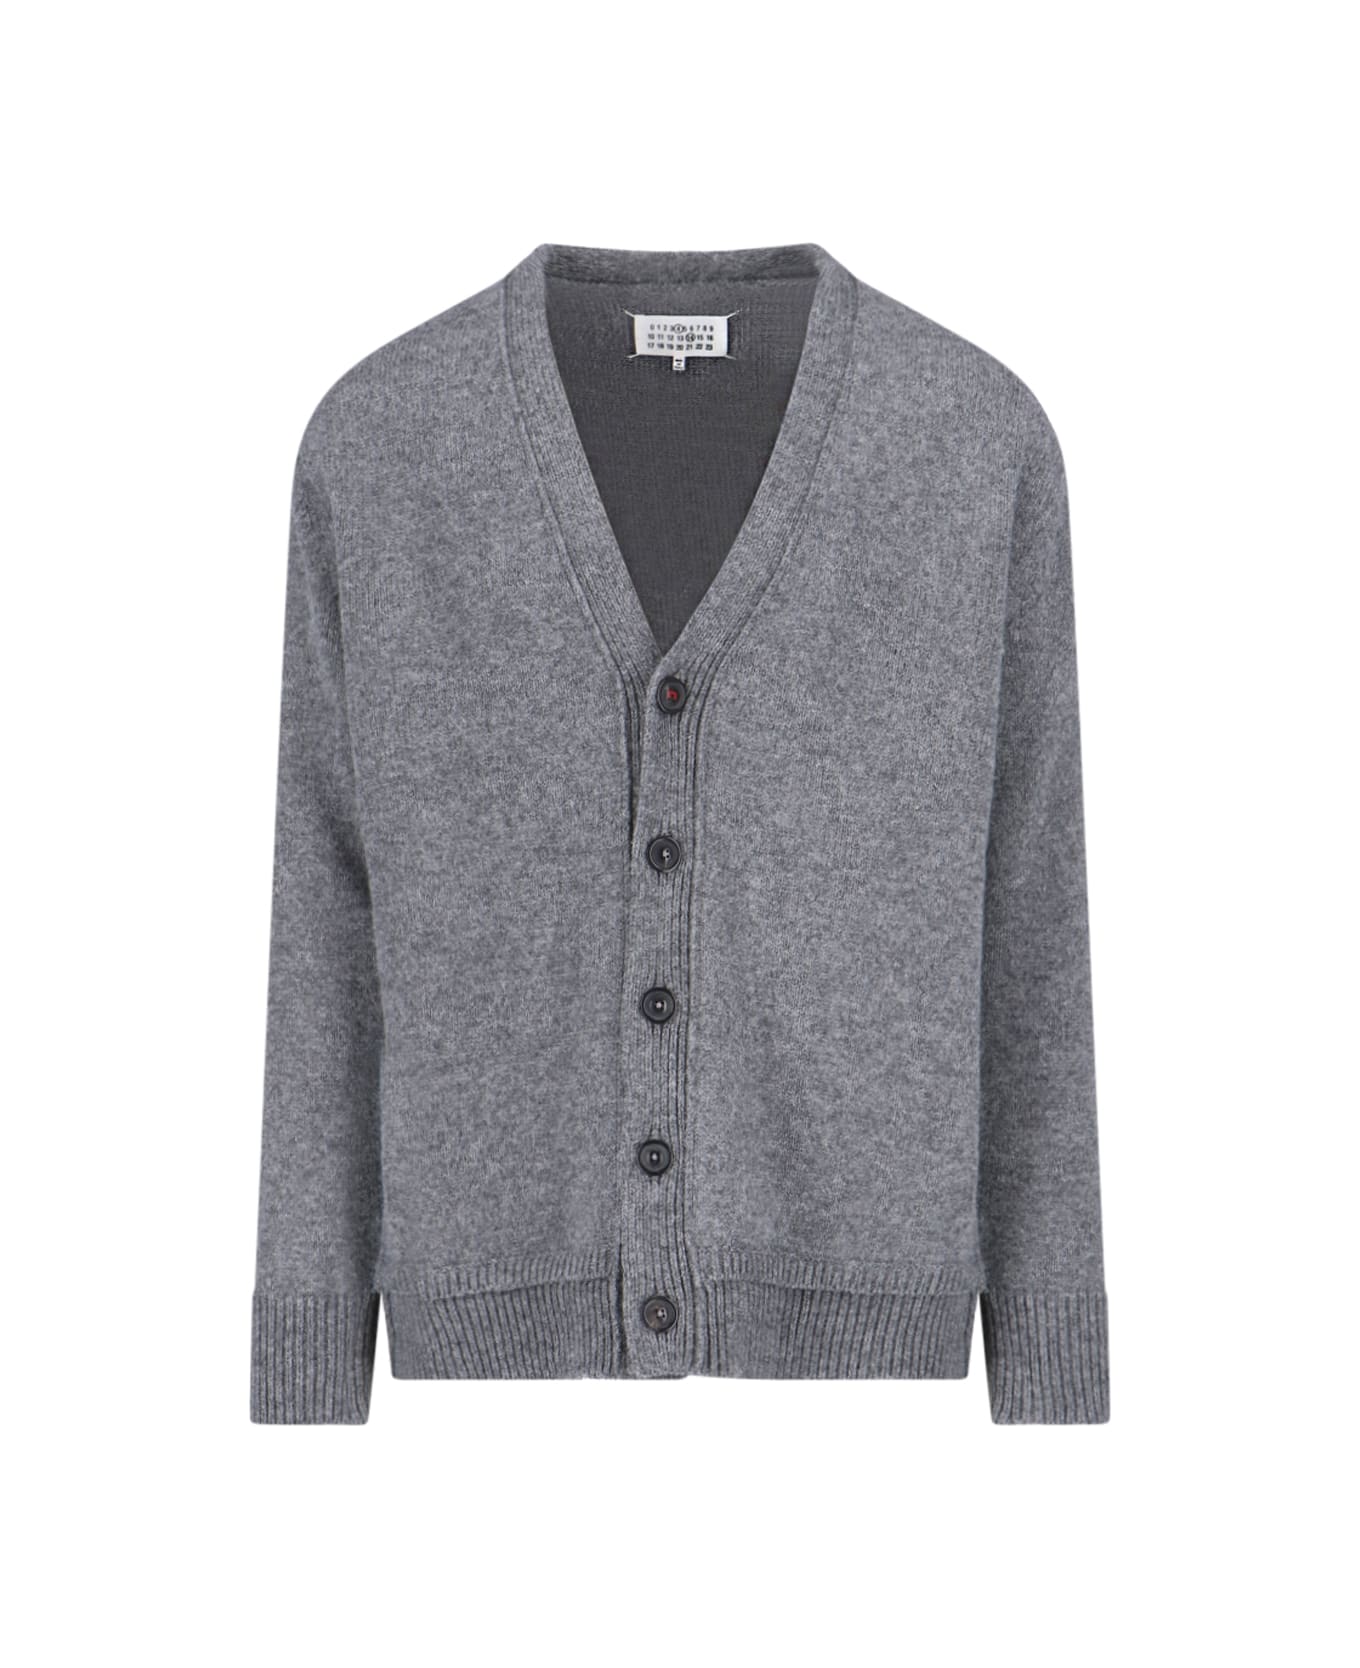 Maison Margiela Buttoned Knitted Cardigan - Grey